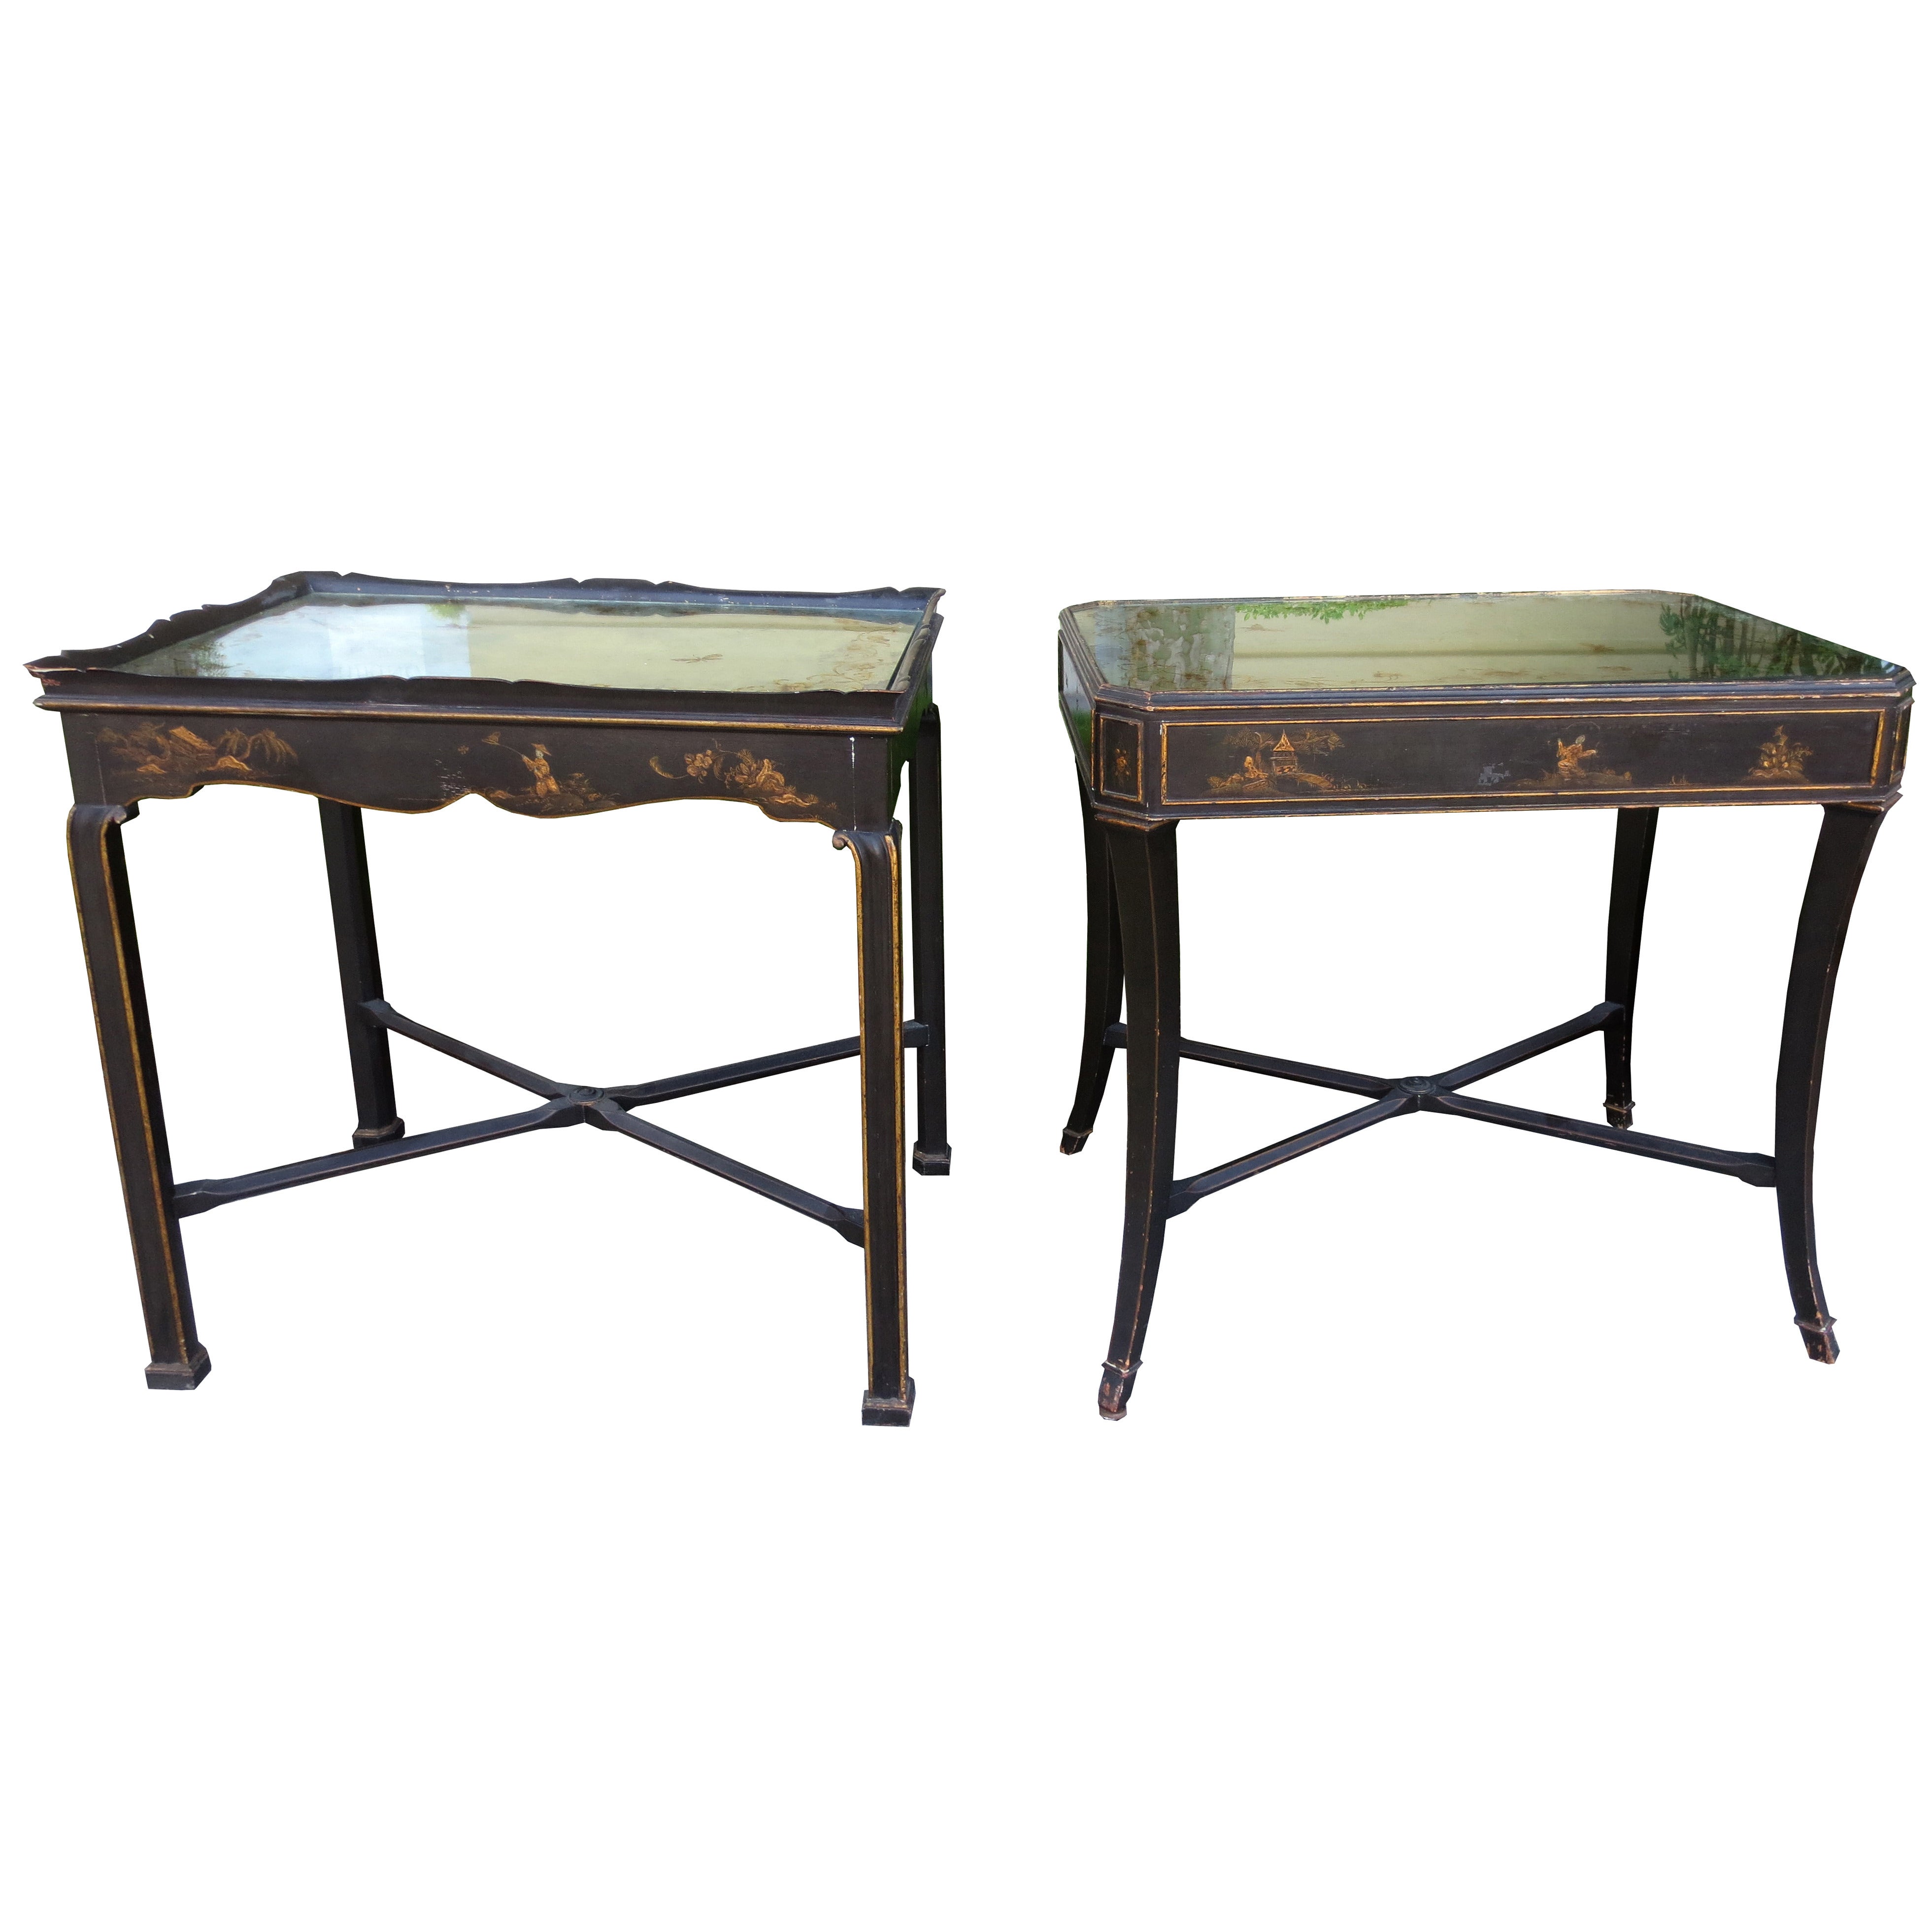 PAIR OF 20thC ENGLOMISE TOP CHINOISERIE SIDE TABLES